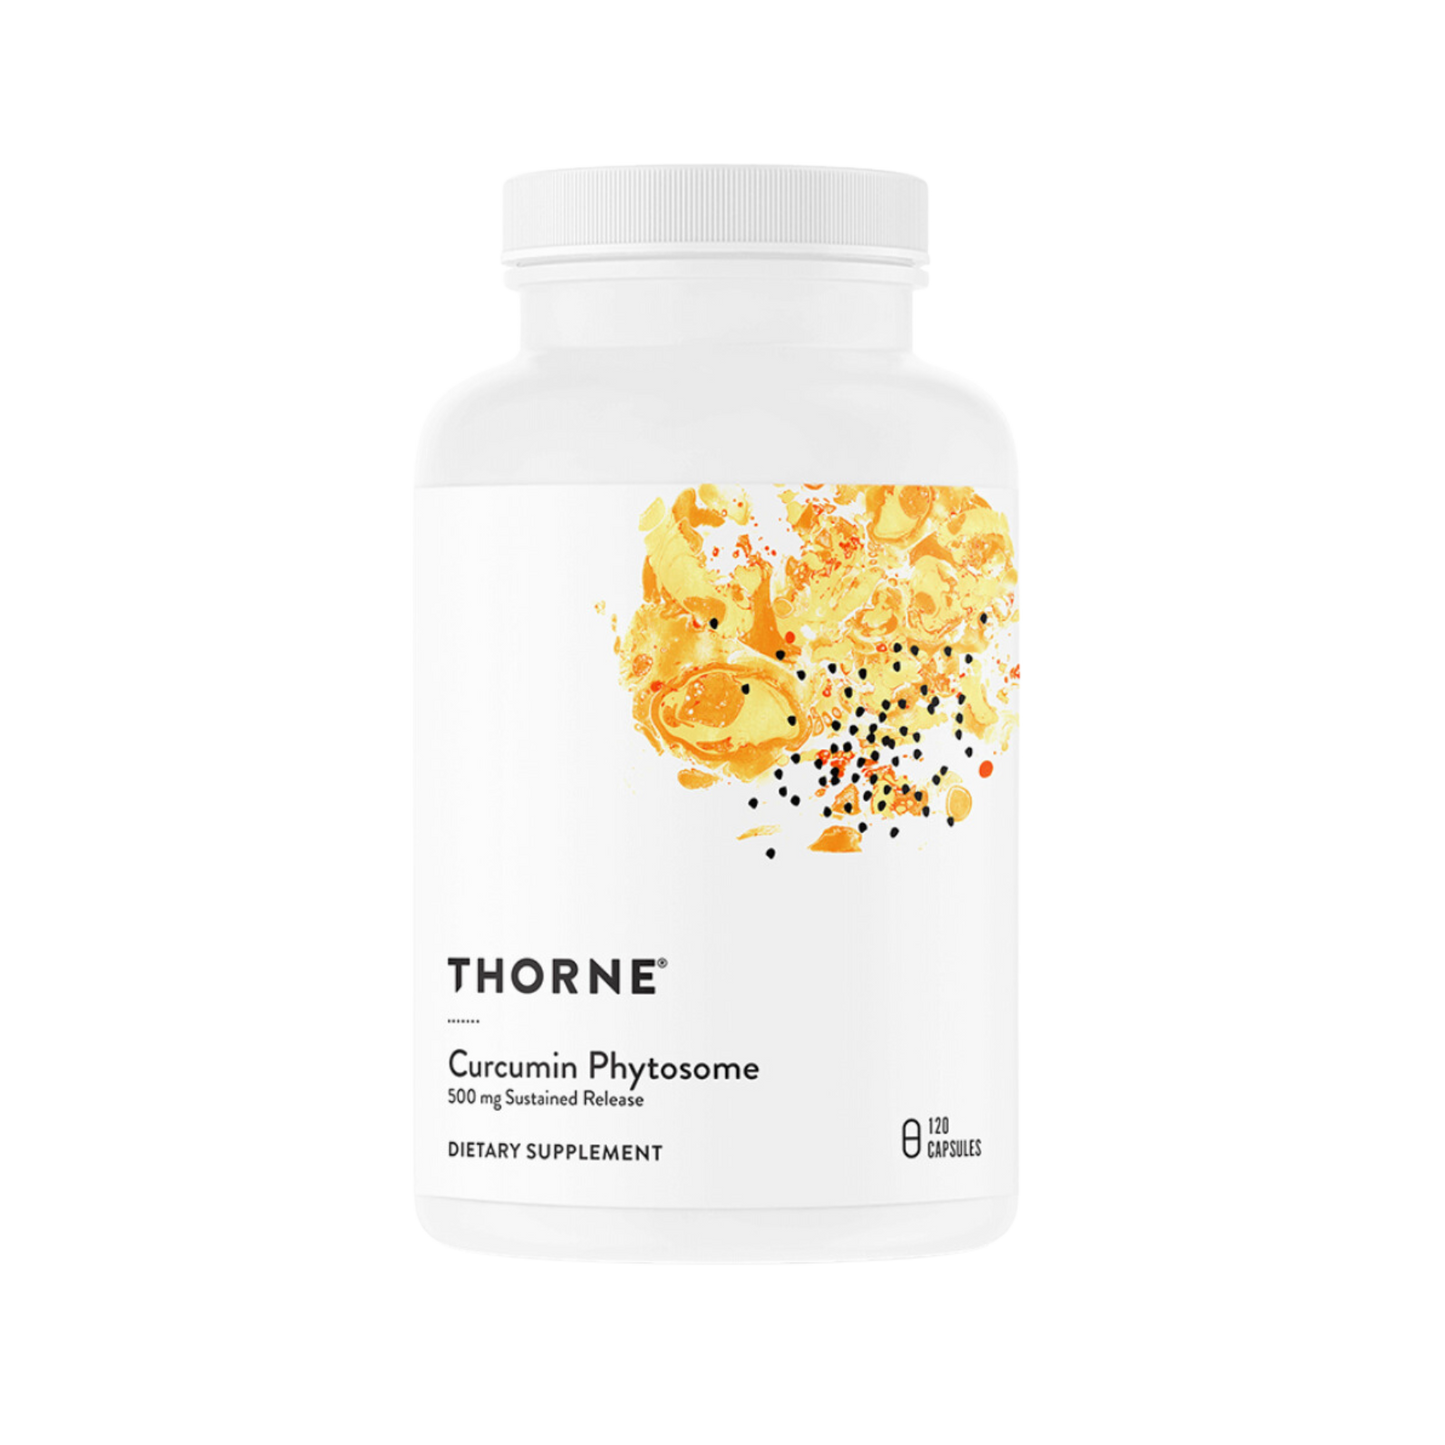 Thorne Curcumin Phytosome  (Sustained Release) Capsules - 500mg